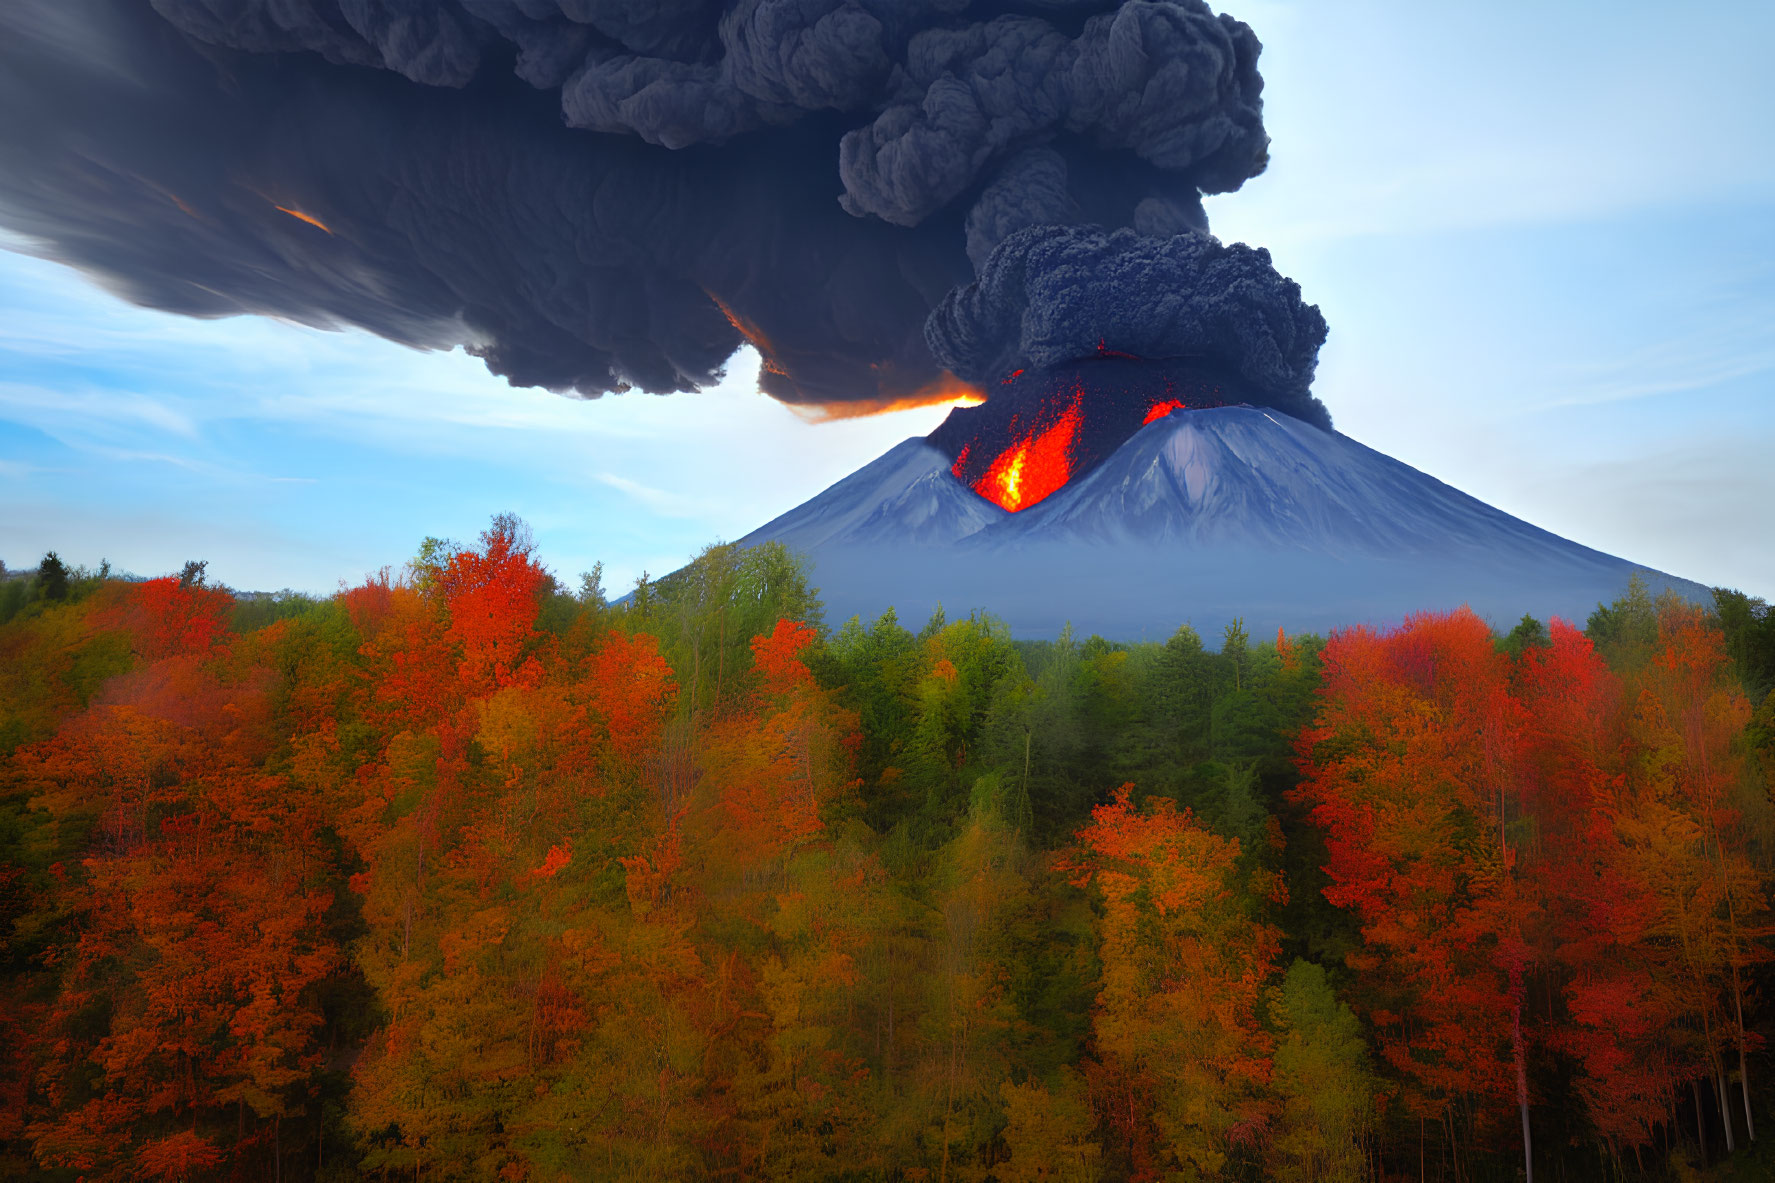 Volcano erupting over autumn forest with smoke and lava